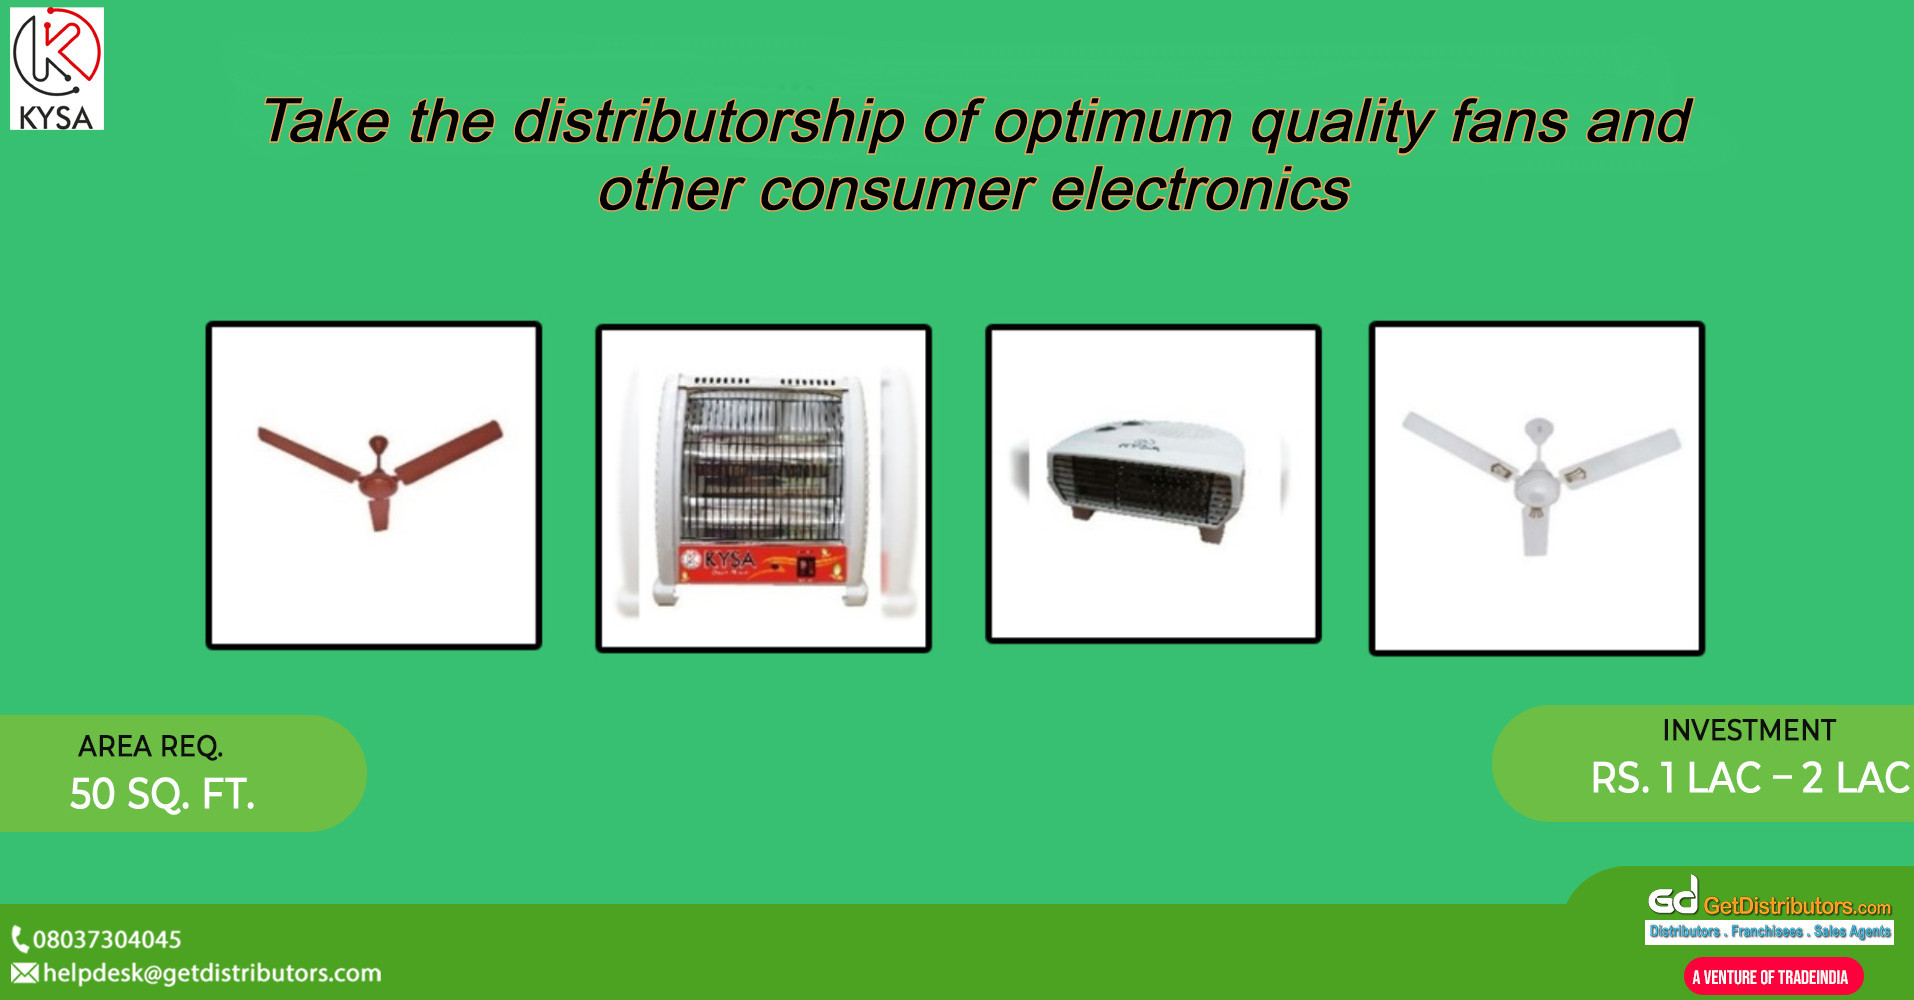 Take the distributorship of optimum quality fans and other consumer electronics